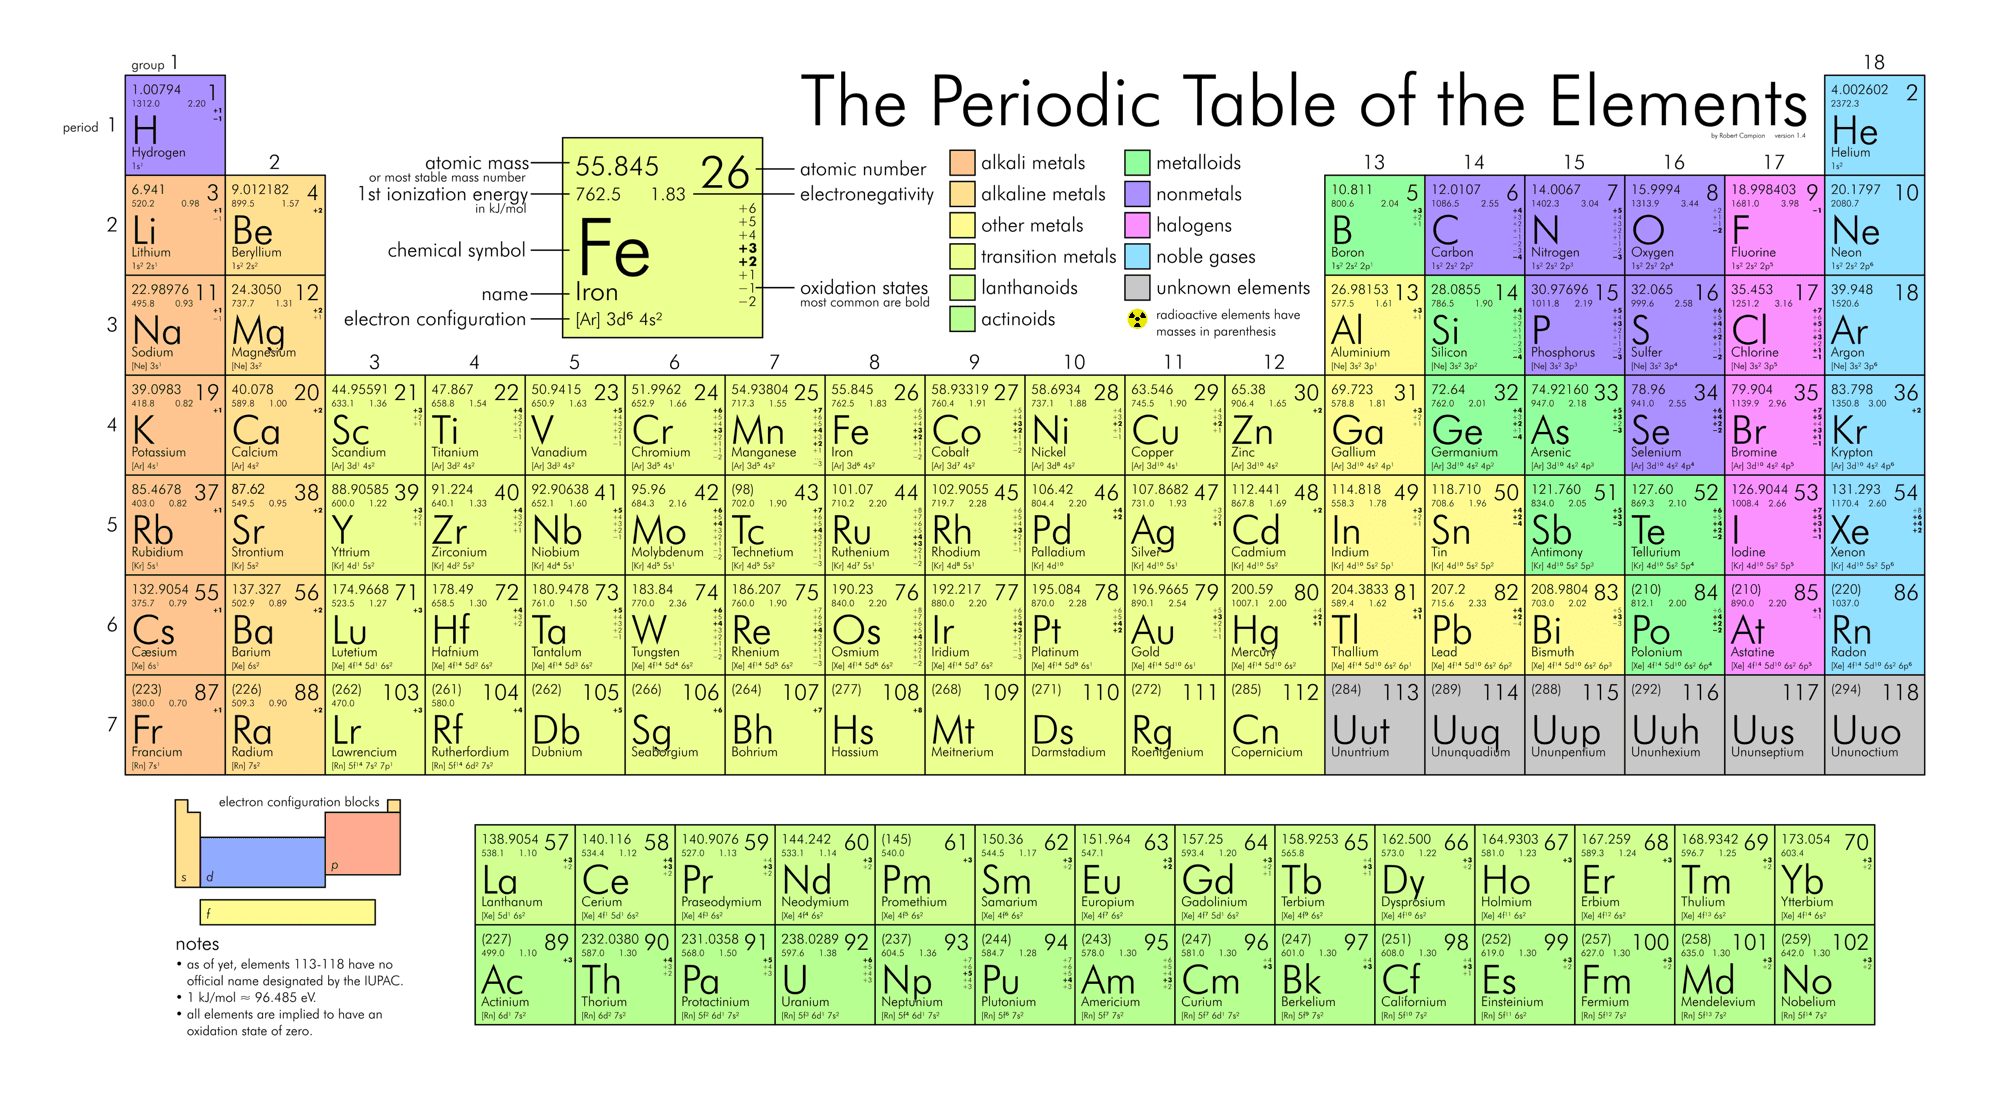 Properties of the Basic Metals Element Group